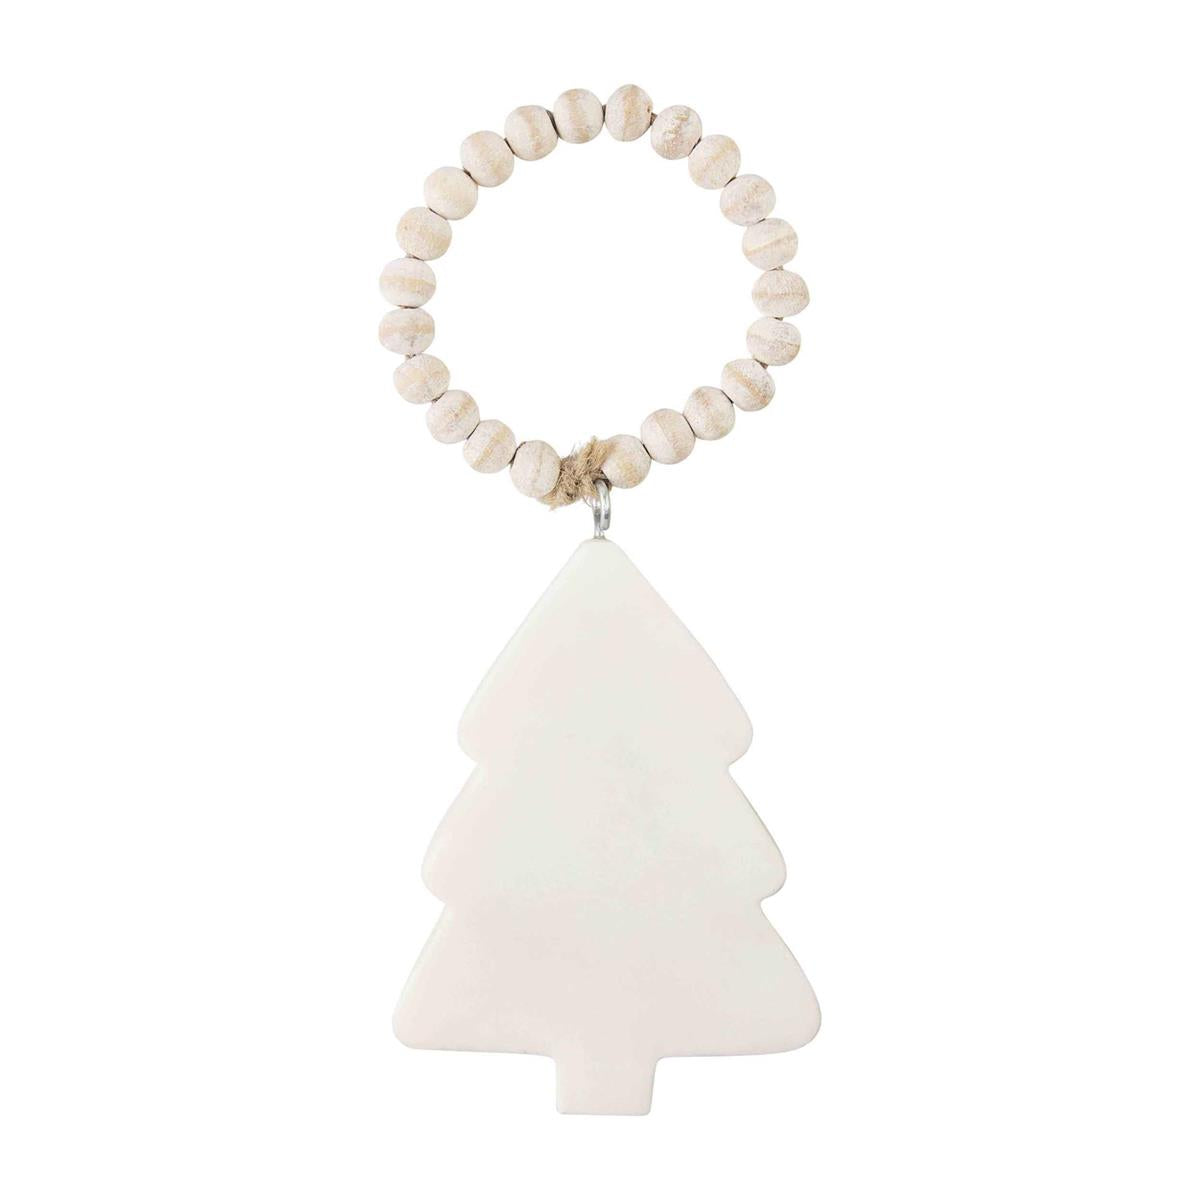 Tree White Marble Ornament